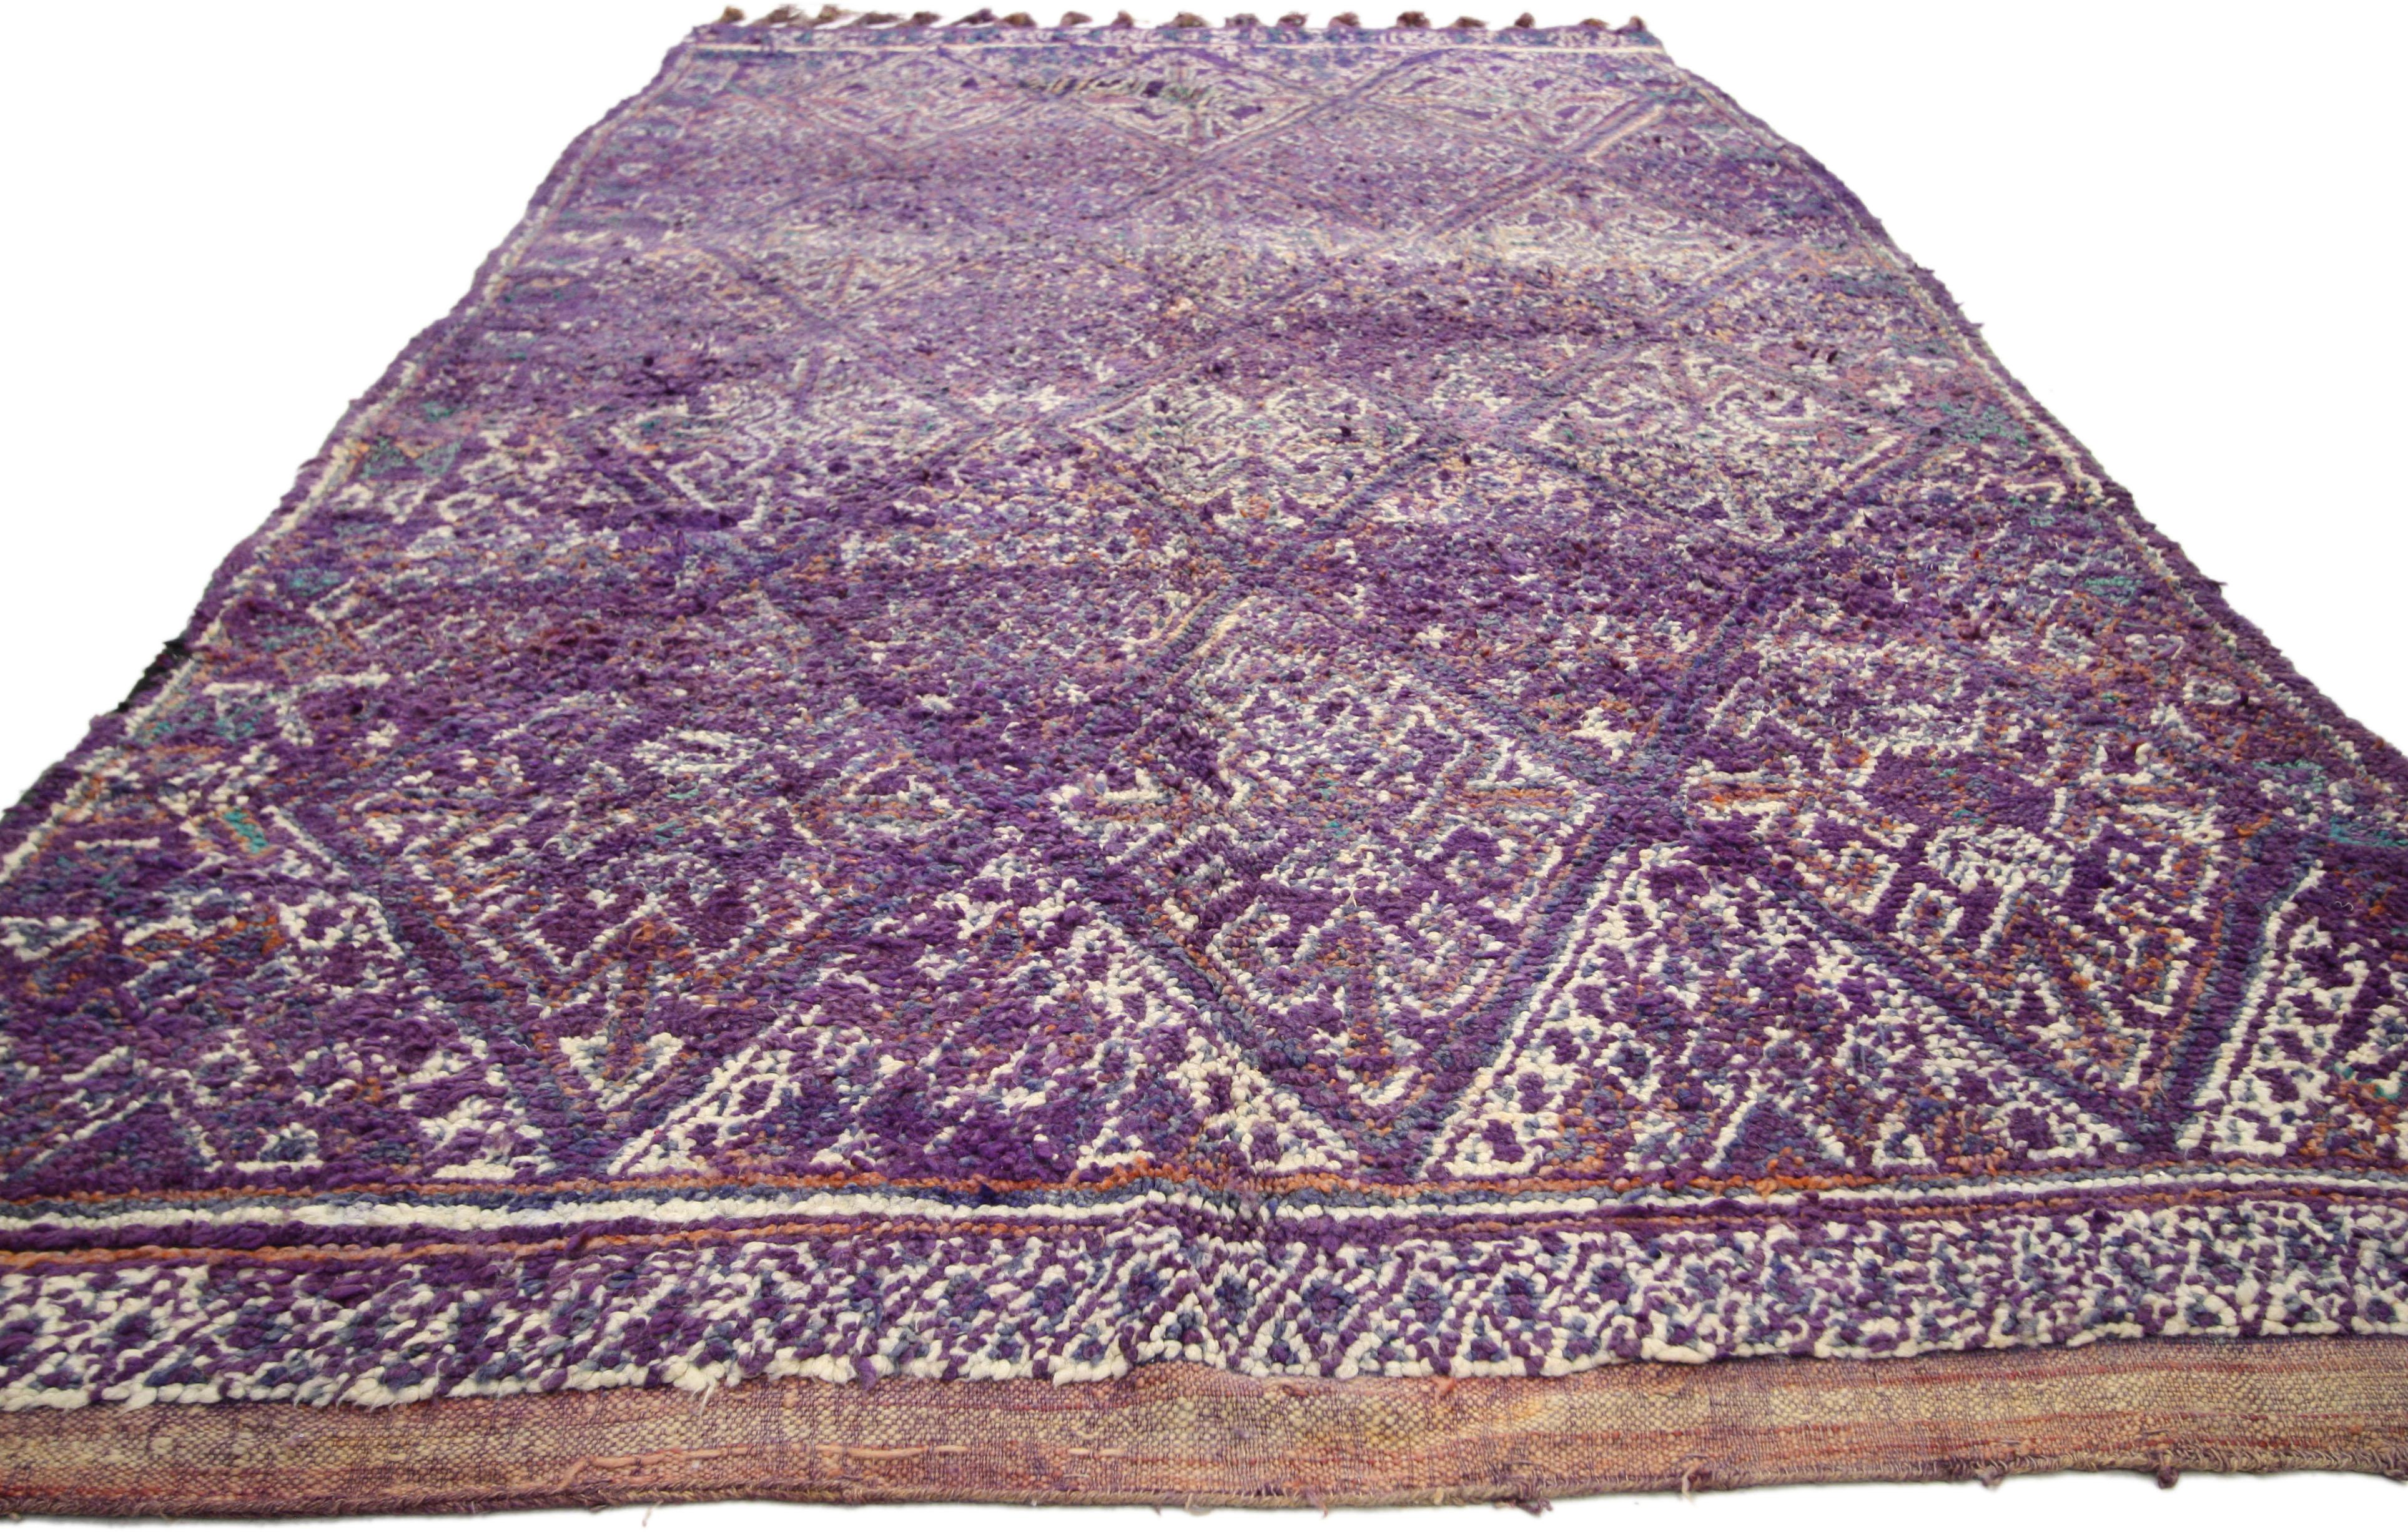 Hand-Knotted Vintage Purple Beni M'Guild Moroccan Rug with Tribal Style, Berber Moroccan Rug